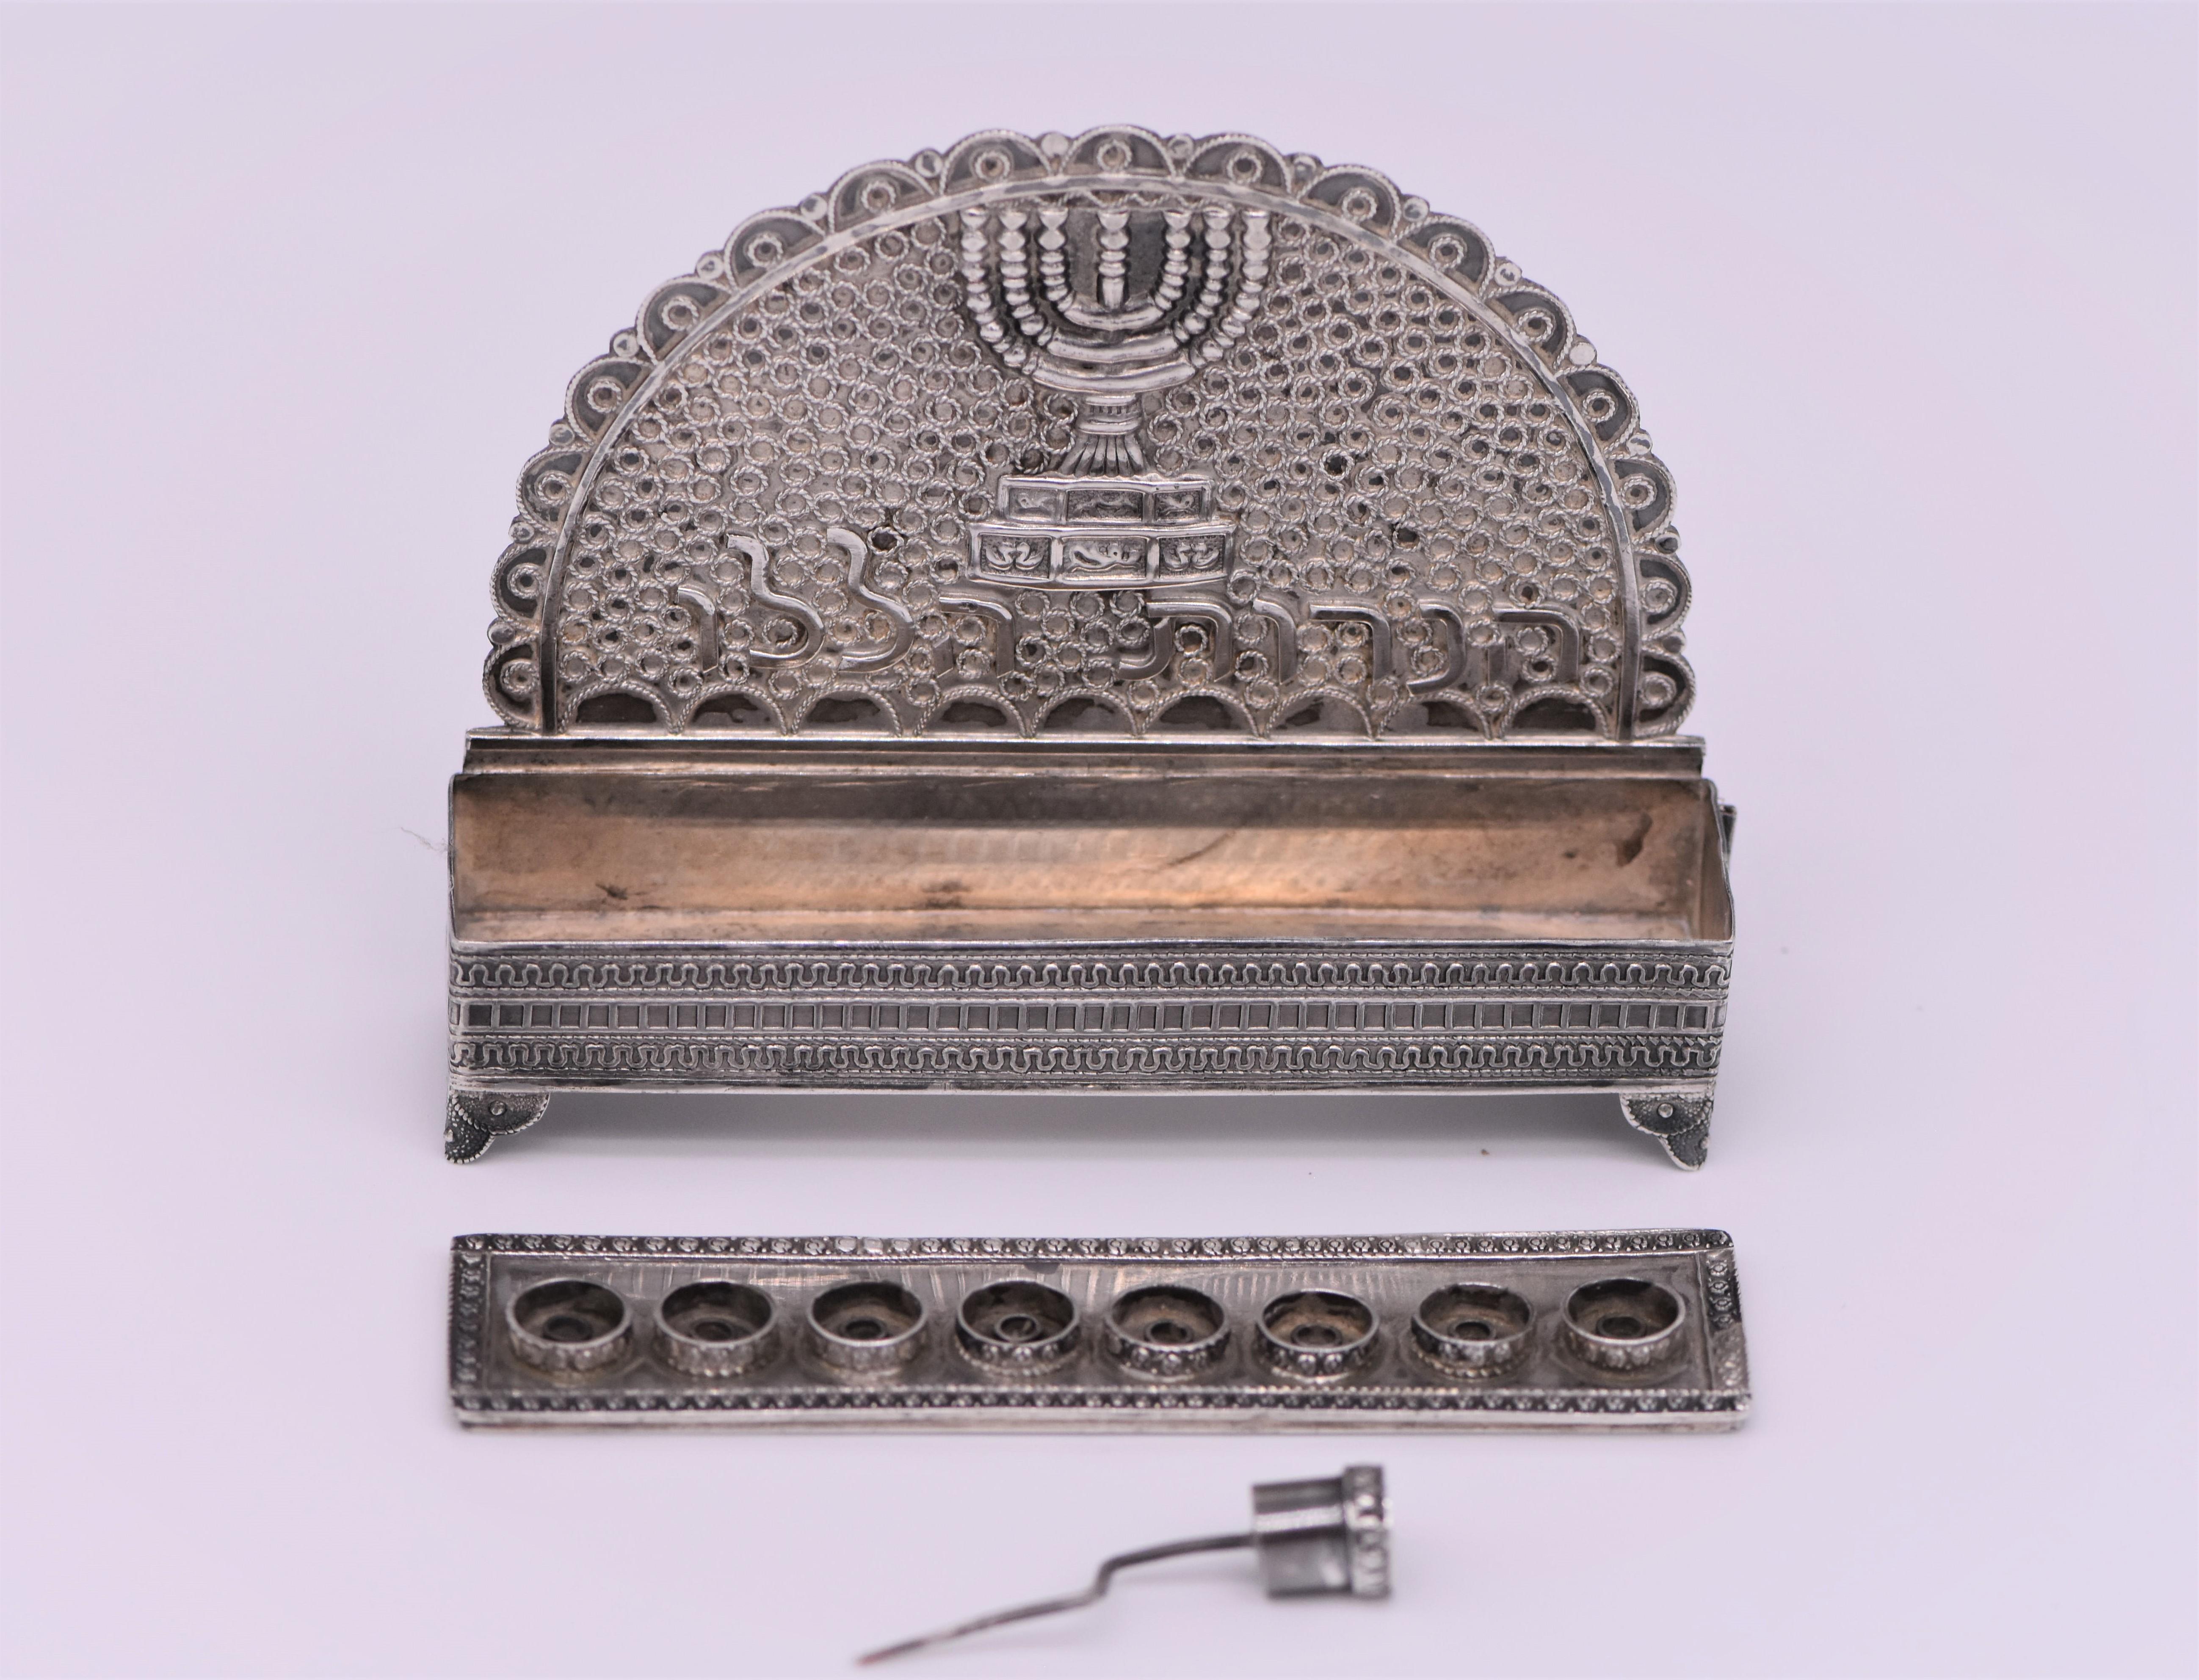 Handmade silver and silver filigree Hanukkah lamp by Nir-Chen, Israel, circa 1950.
The backplate decorated with silver filigree, and applied with the Temple Menorah in the center, and with the Hebrew words: 